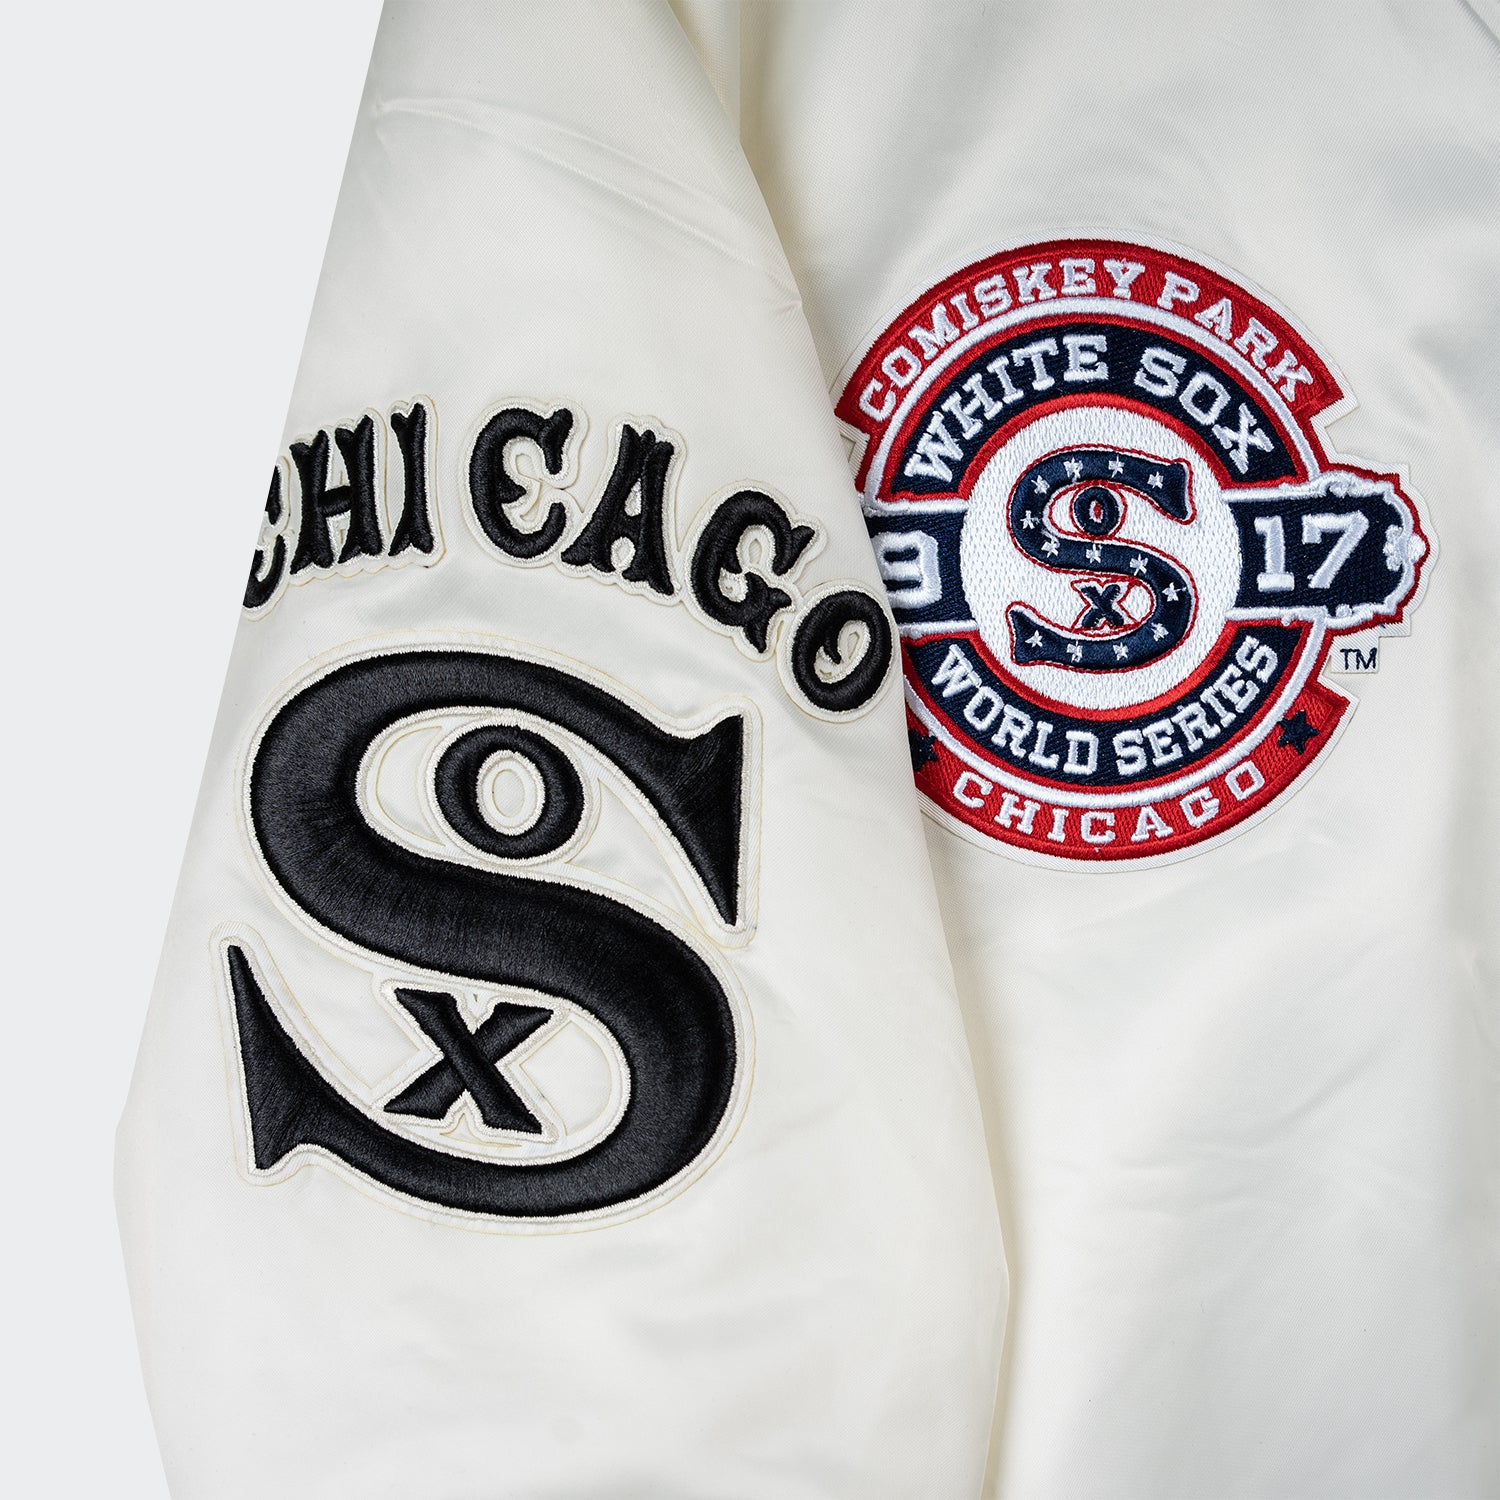 Chicago White Sox Gear, White Sox Jerseys, Chicago Pro Shop